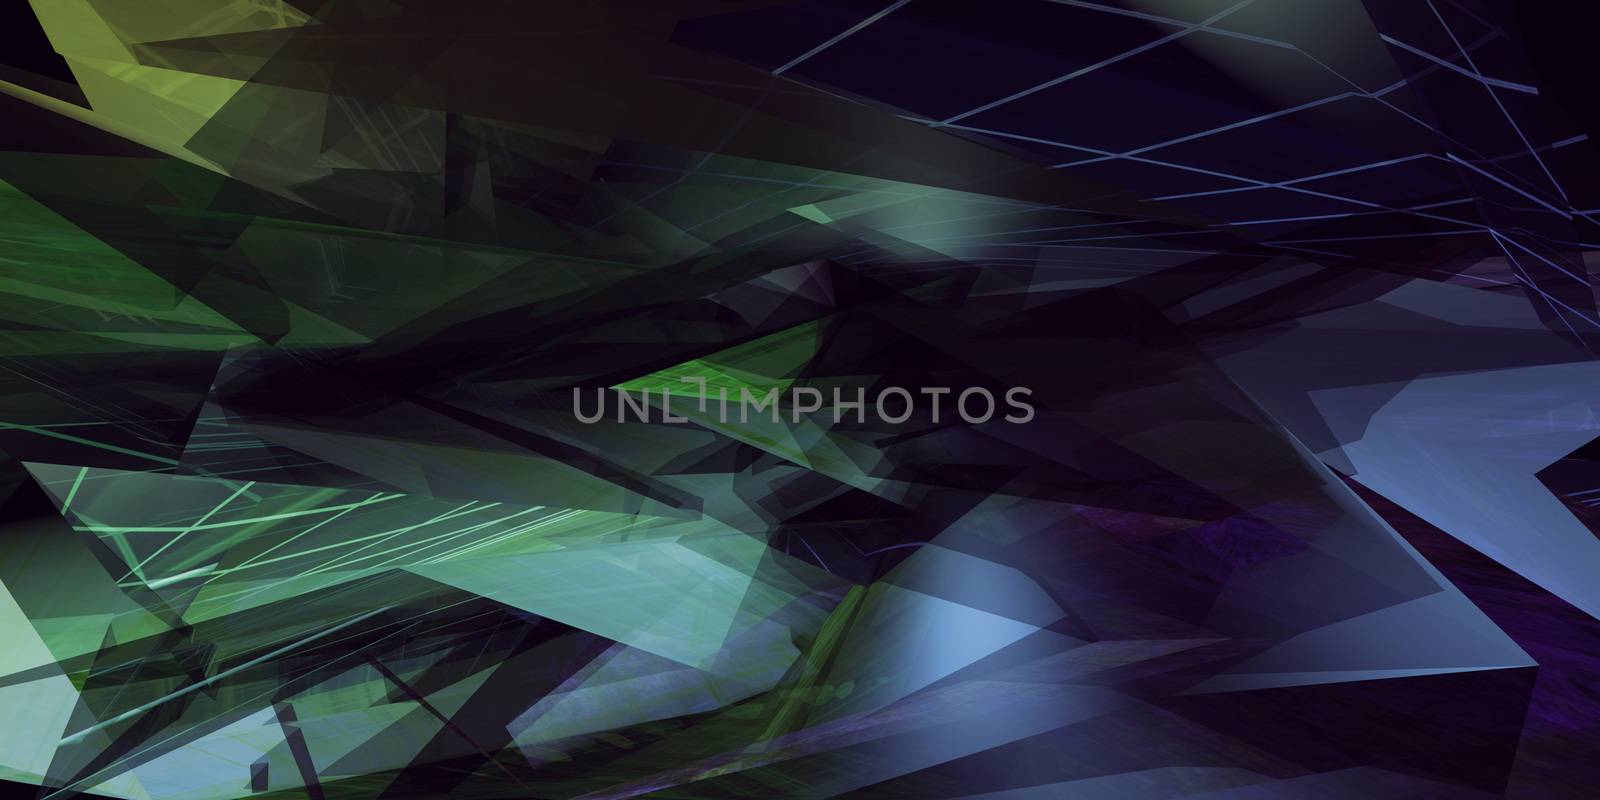 Futuristic Abstract Design Background or Wallpaper Art